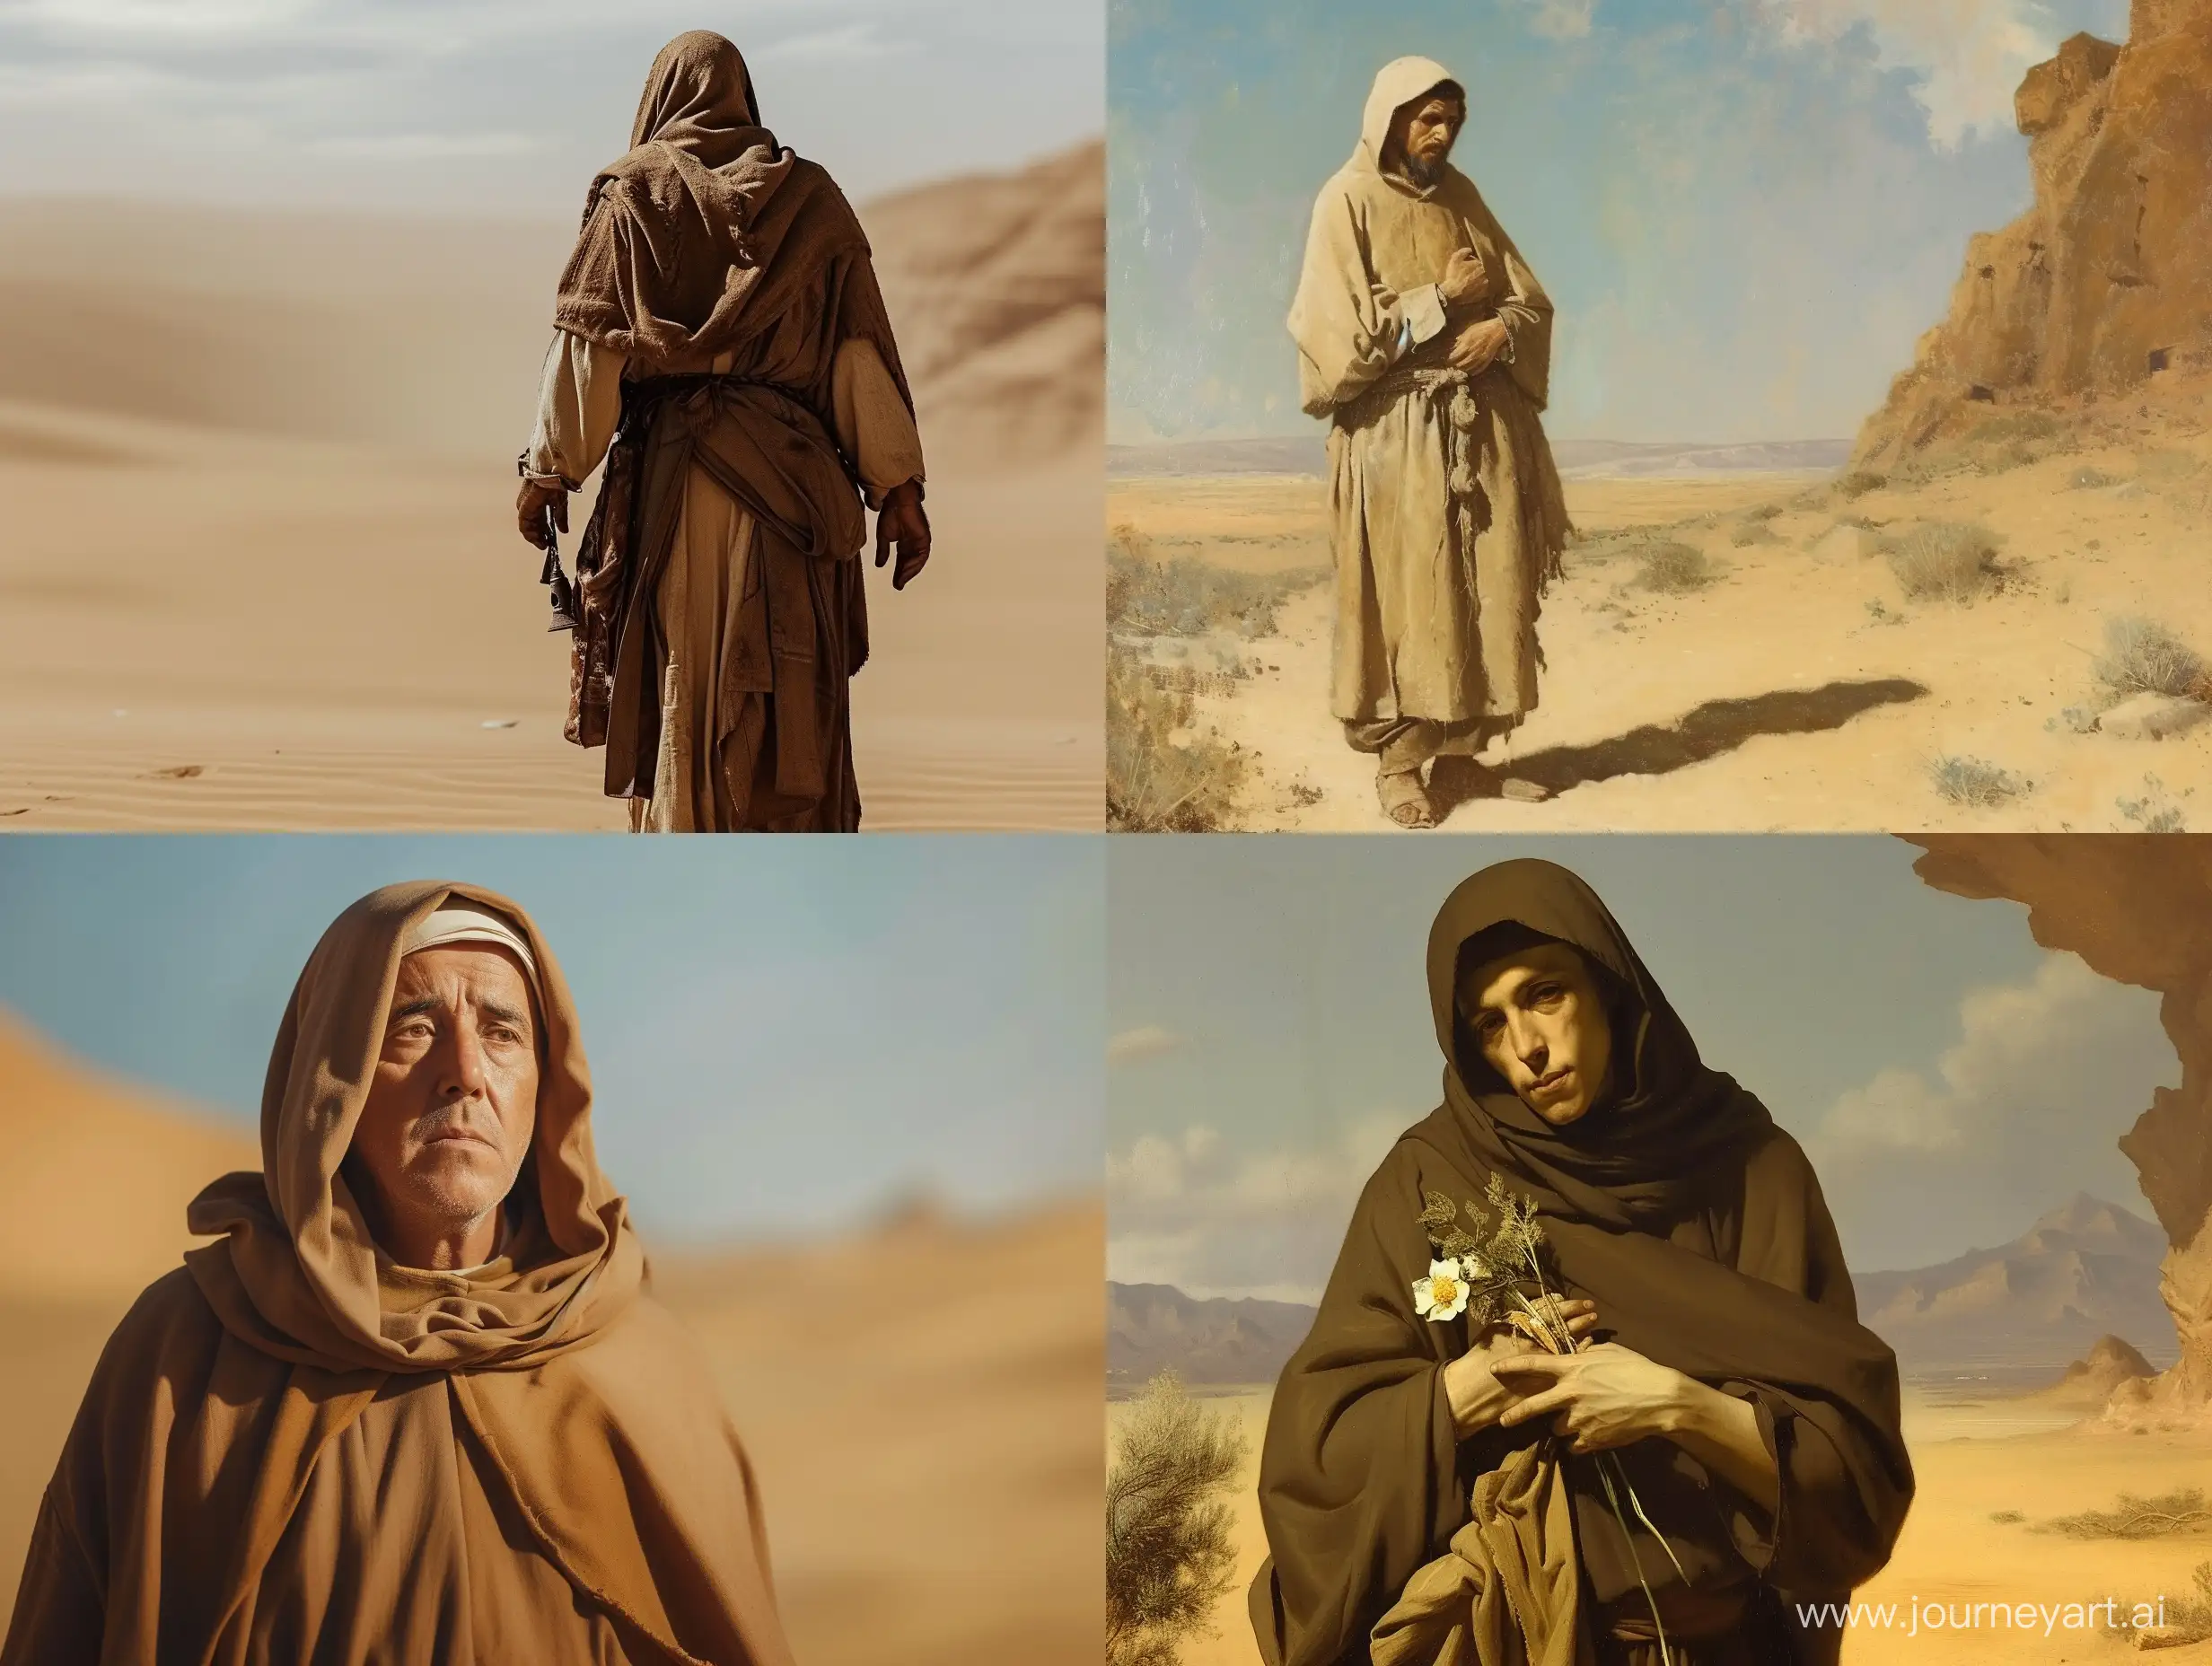 The great Saint Anthony, father of monks, in Coptic monastic garb in the desert